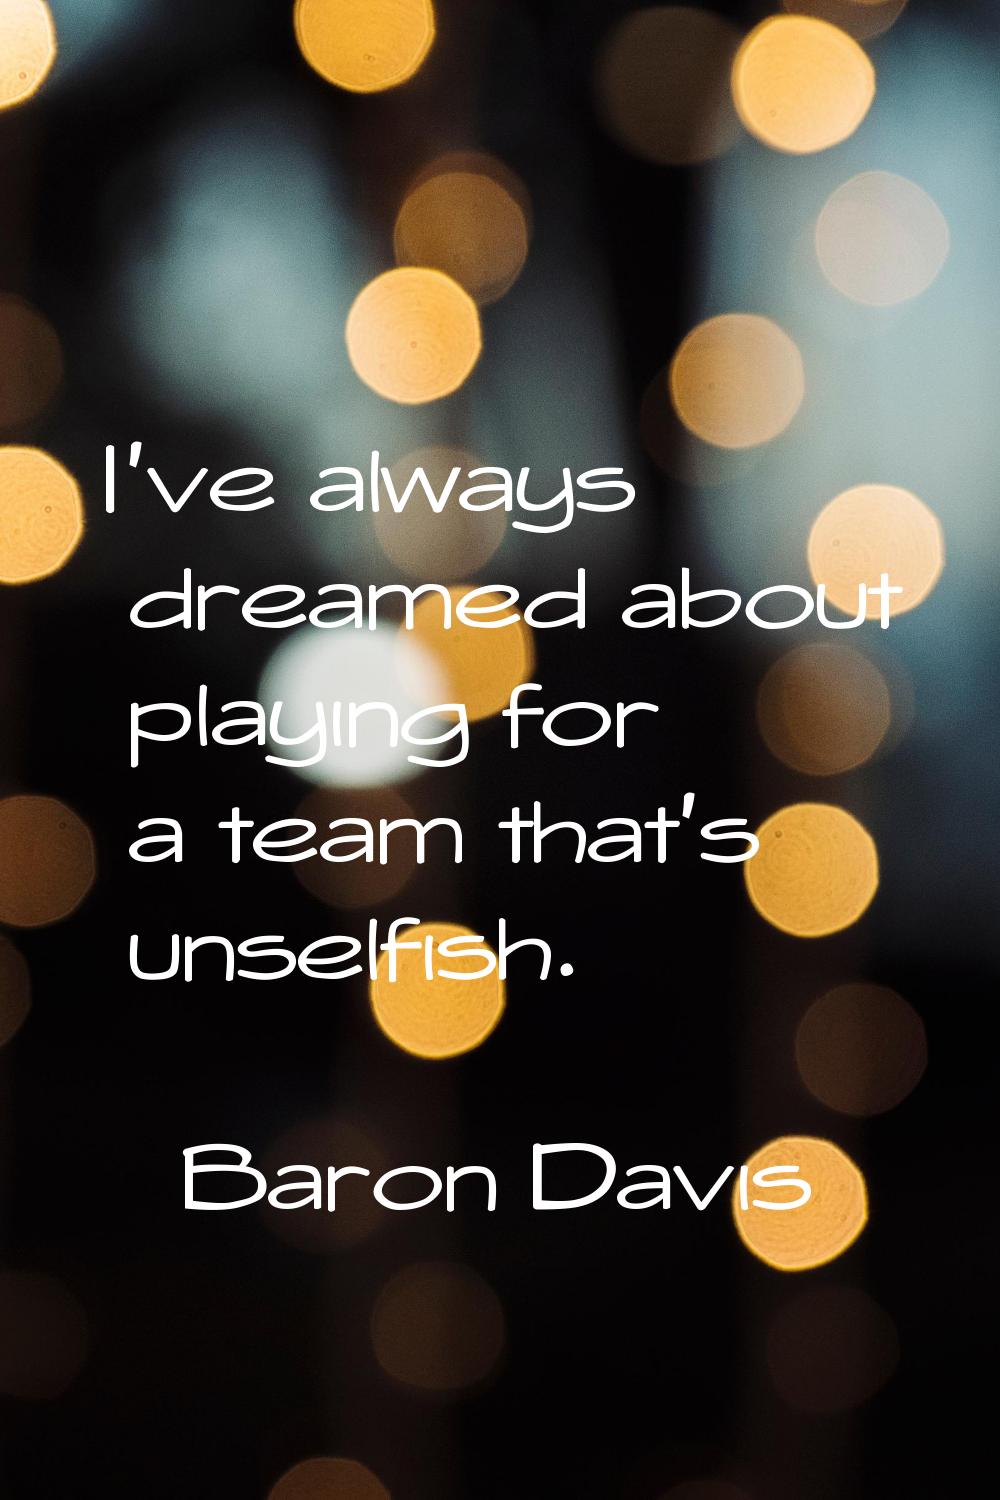 I've always dreamed about playing for a team that's unselfish.